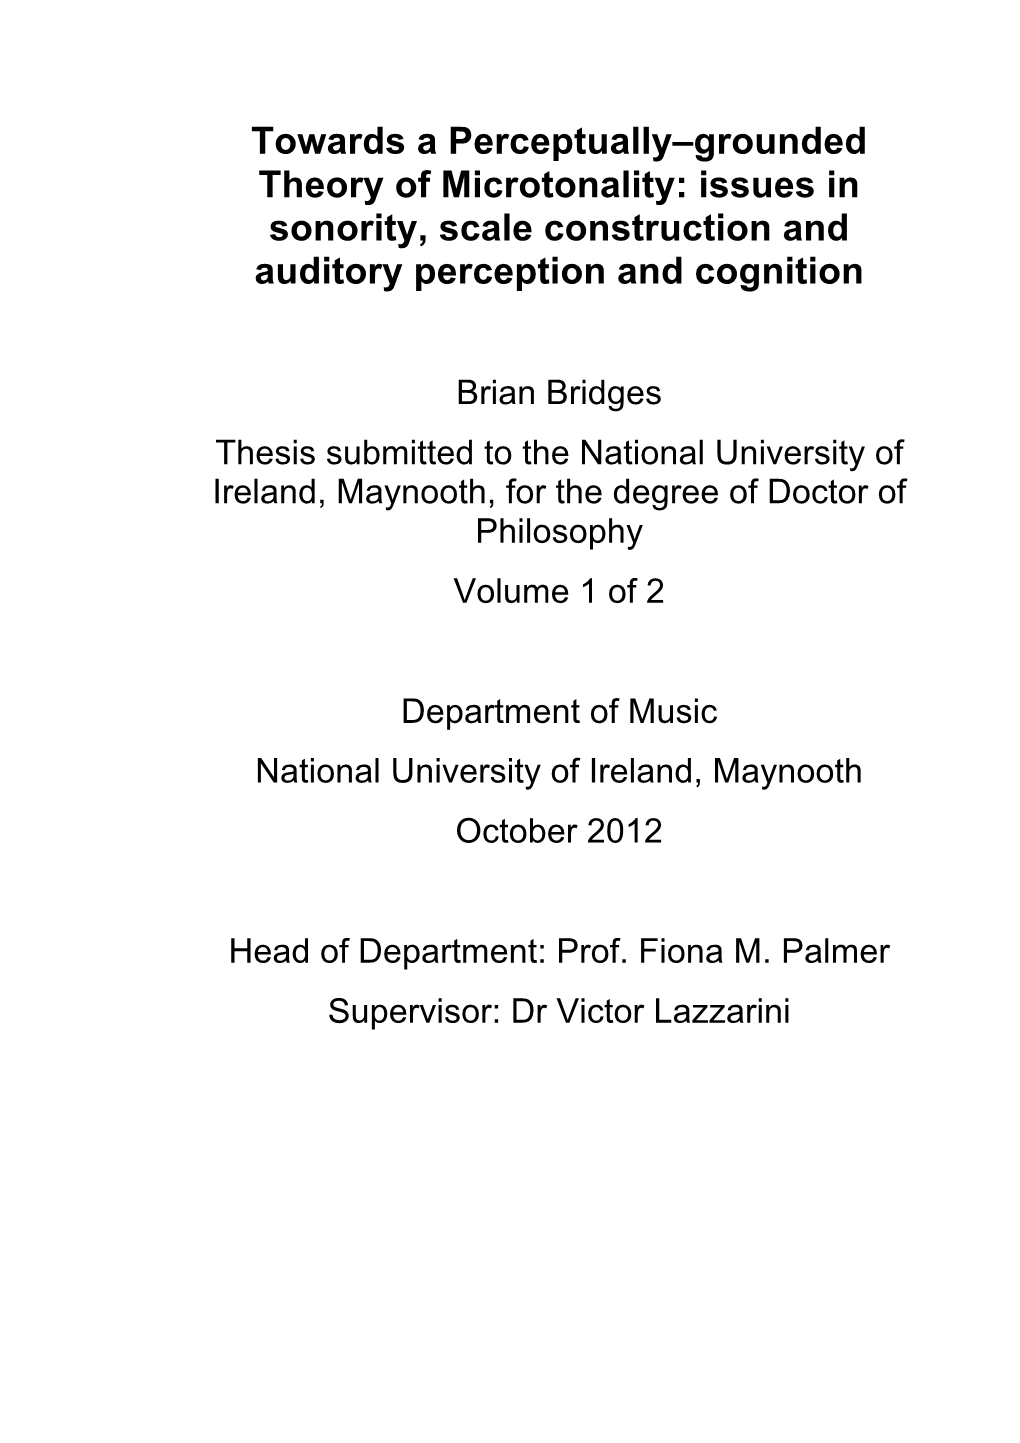 Towards a Perceptually–Grounded Theory of Microtonality: Issues in Sonority, Scale Construction and Auditory Perception and Cognition